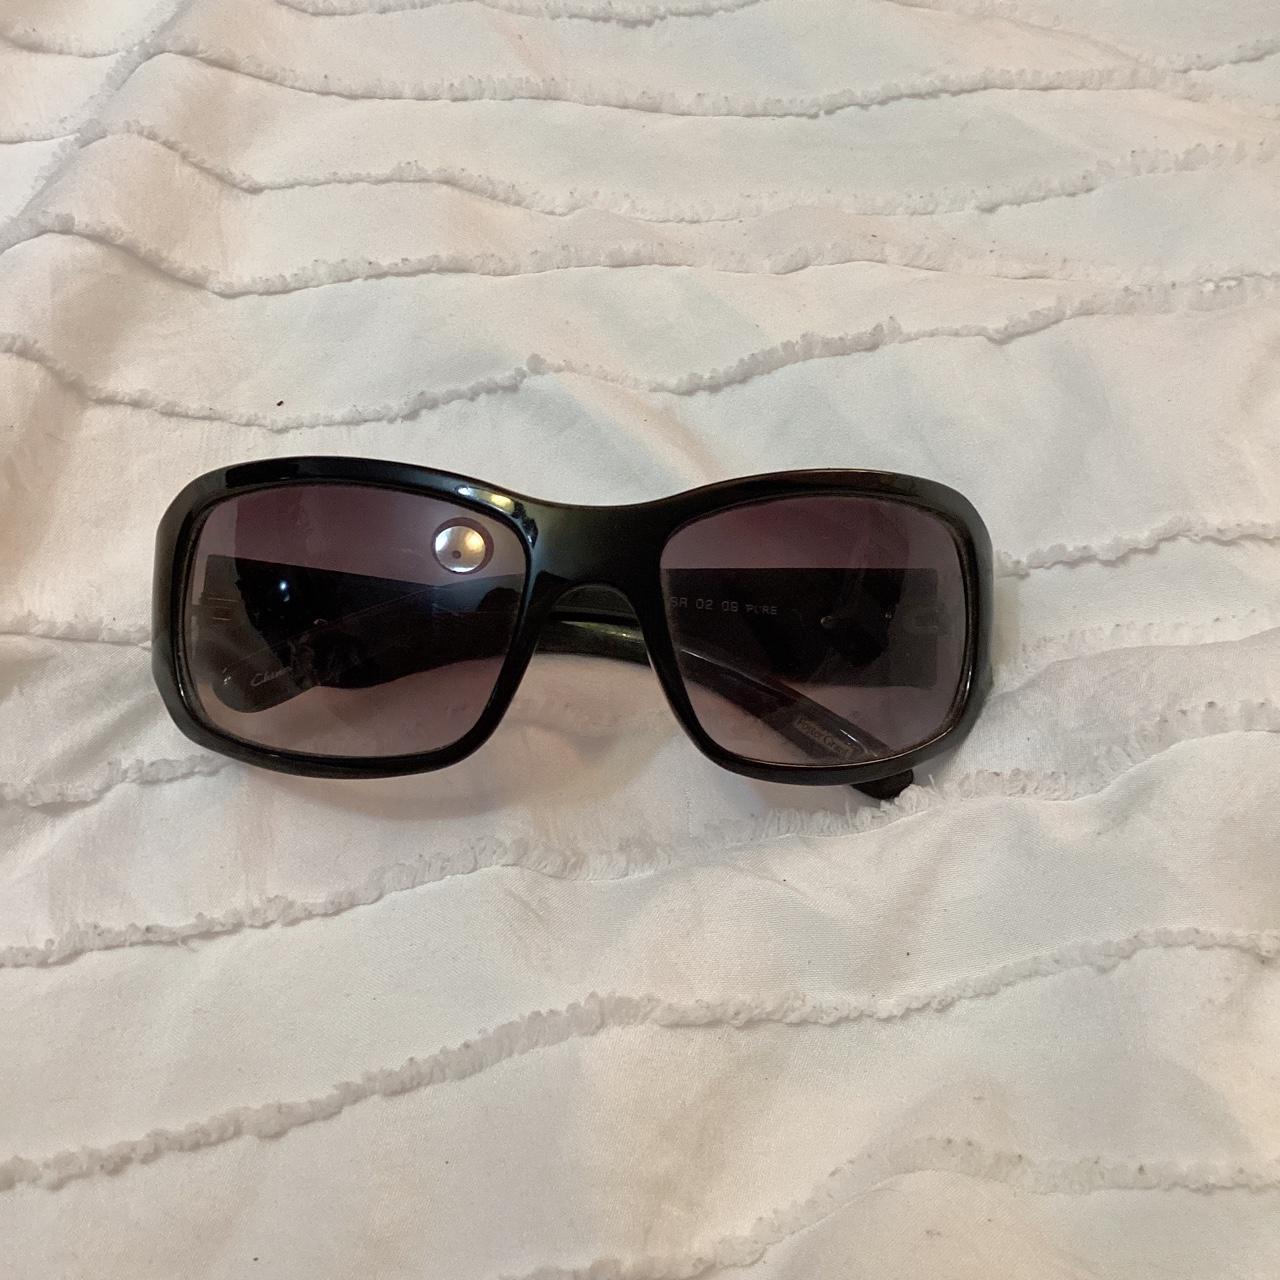 Foster Grant Sunglasses Y2K style Silver Detailing... - Depop